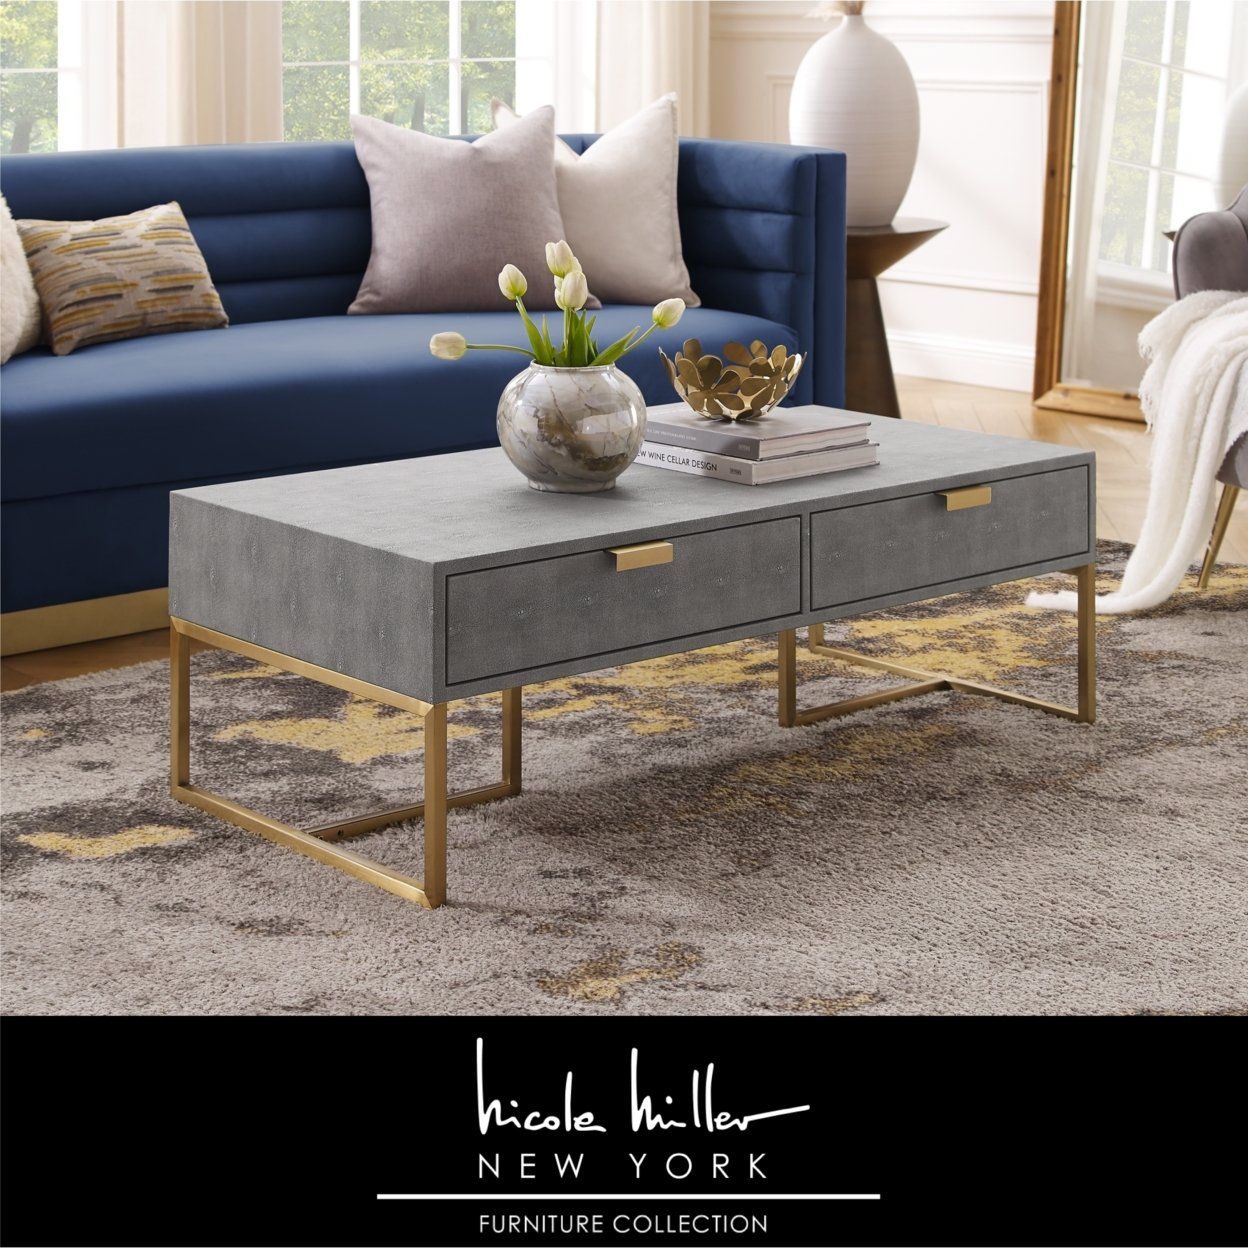 Isidro Coffee Table - 2 Drawers , Brushed Gold/Chrome Base And Handles , Stainless Steel Base - Grey/gold